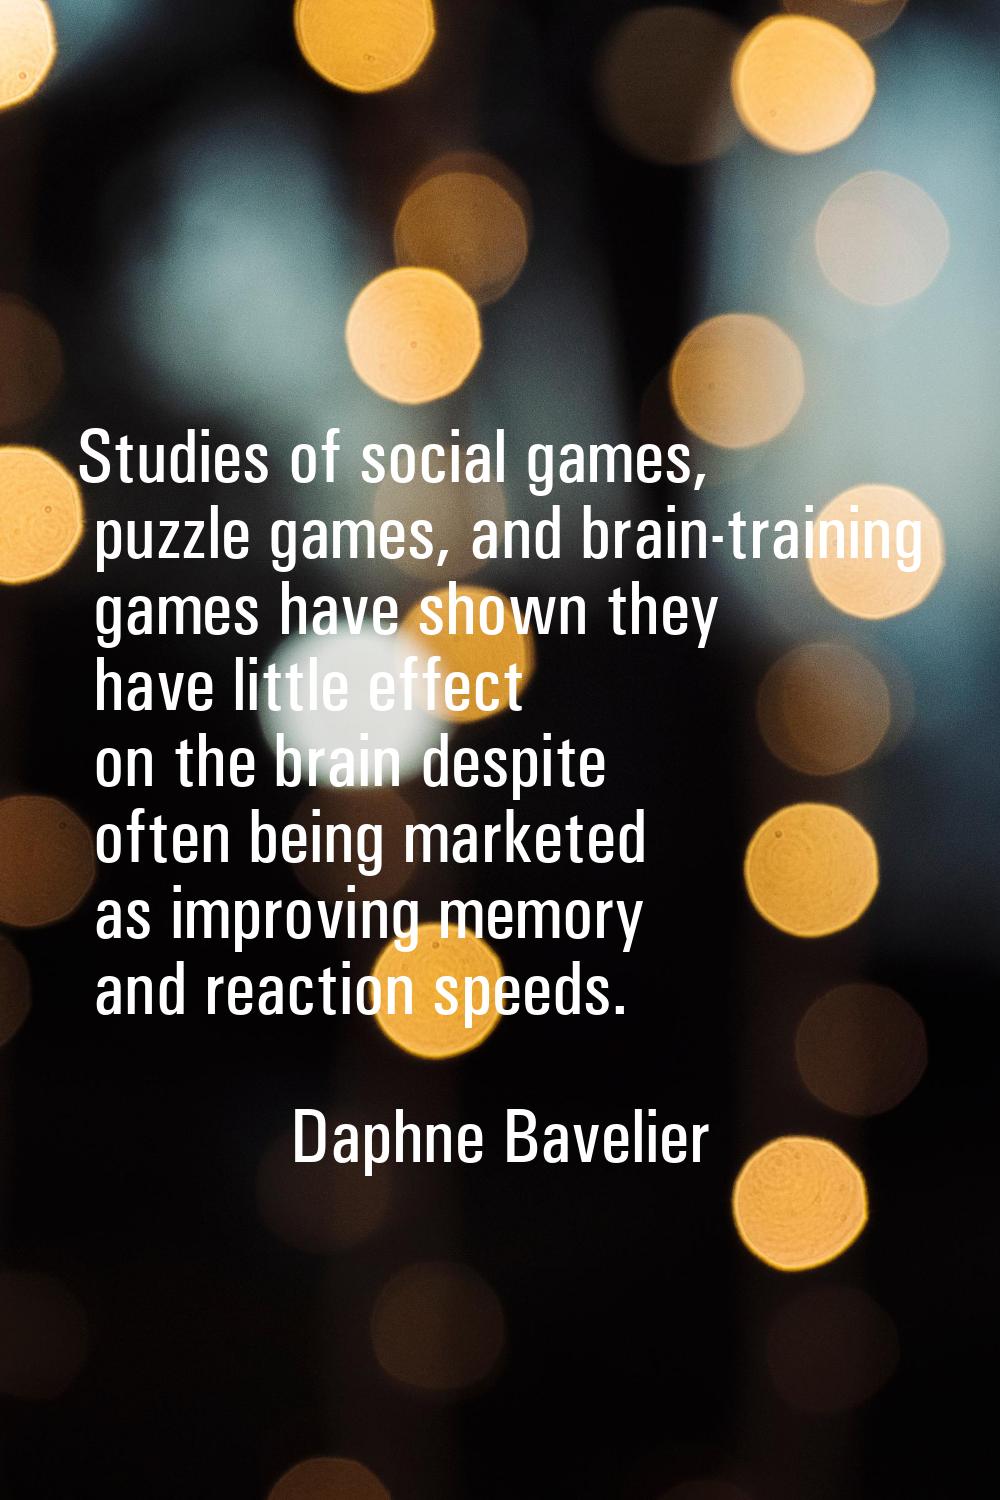 Studies of social games, puzzle games, and brain-training games have shown they have little effect 